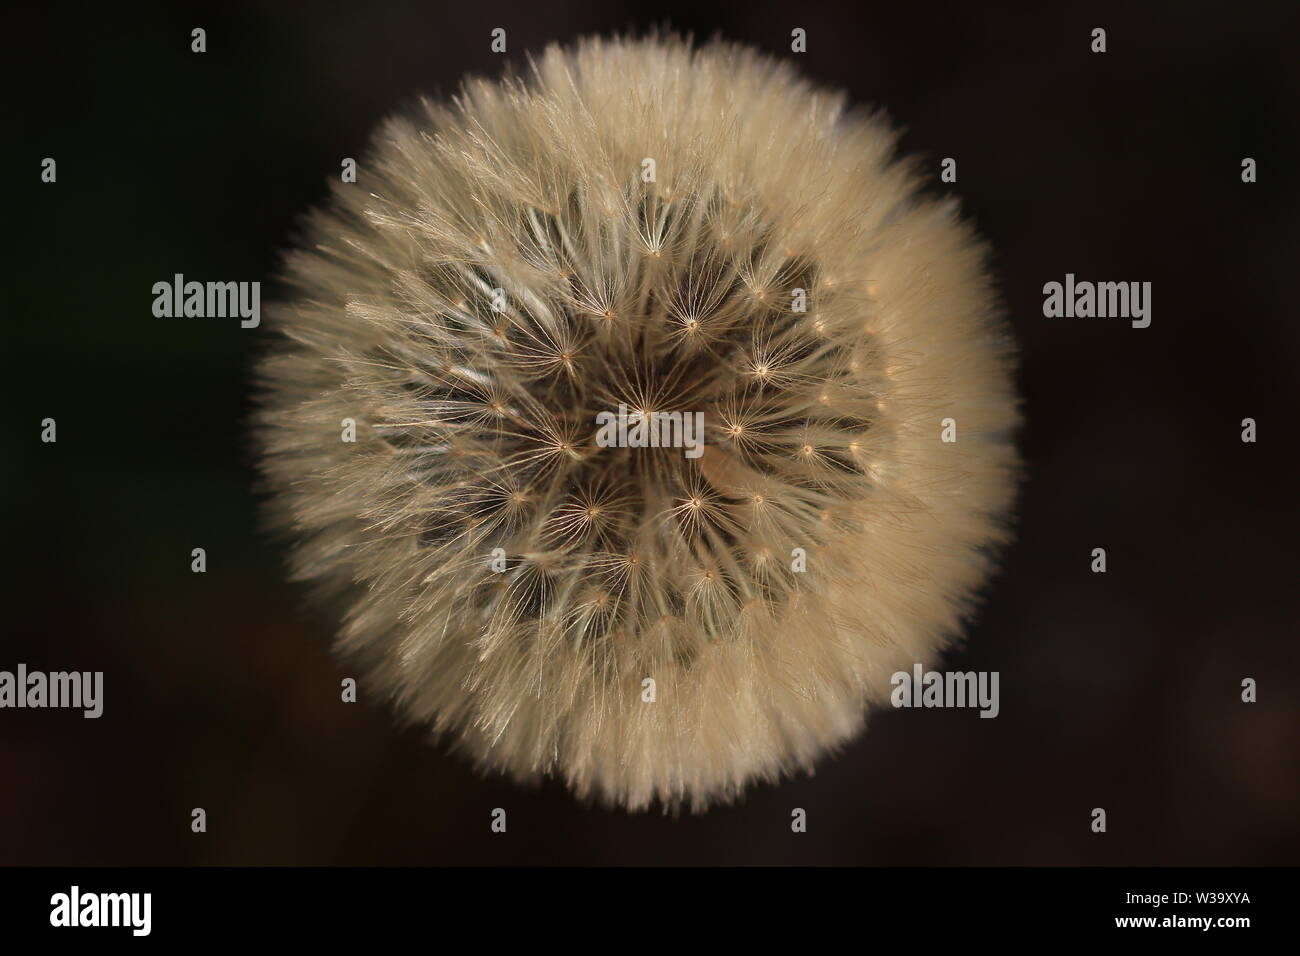 dandelion seeds seen from above, close up and on a black background Stock Photo